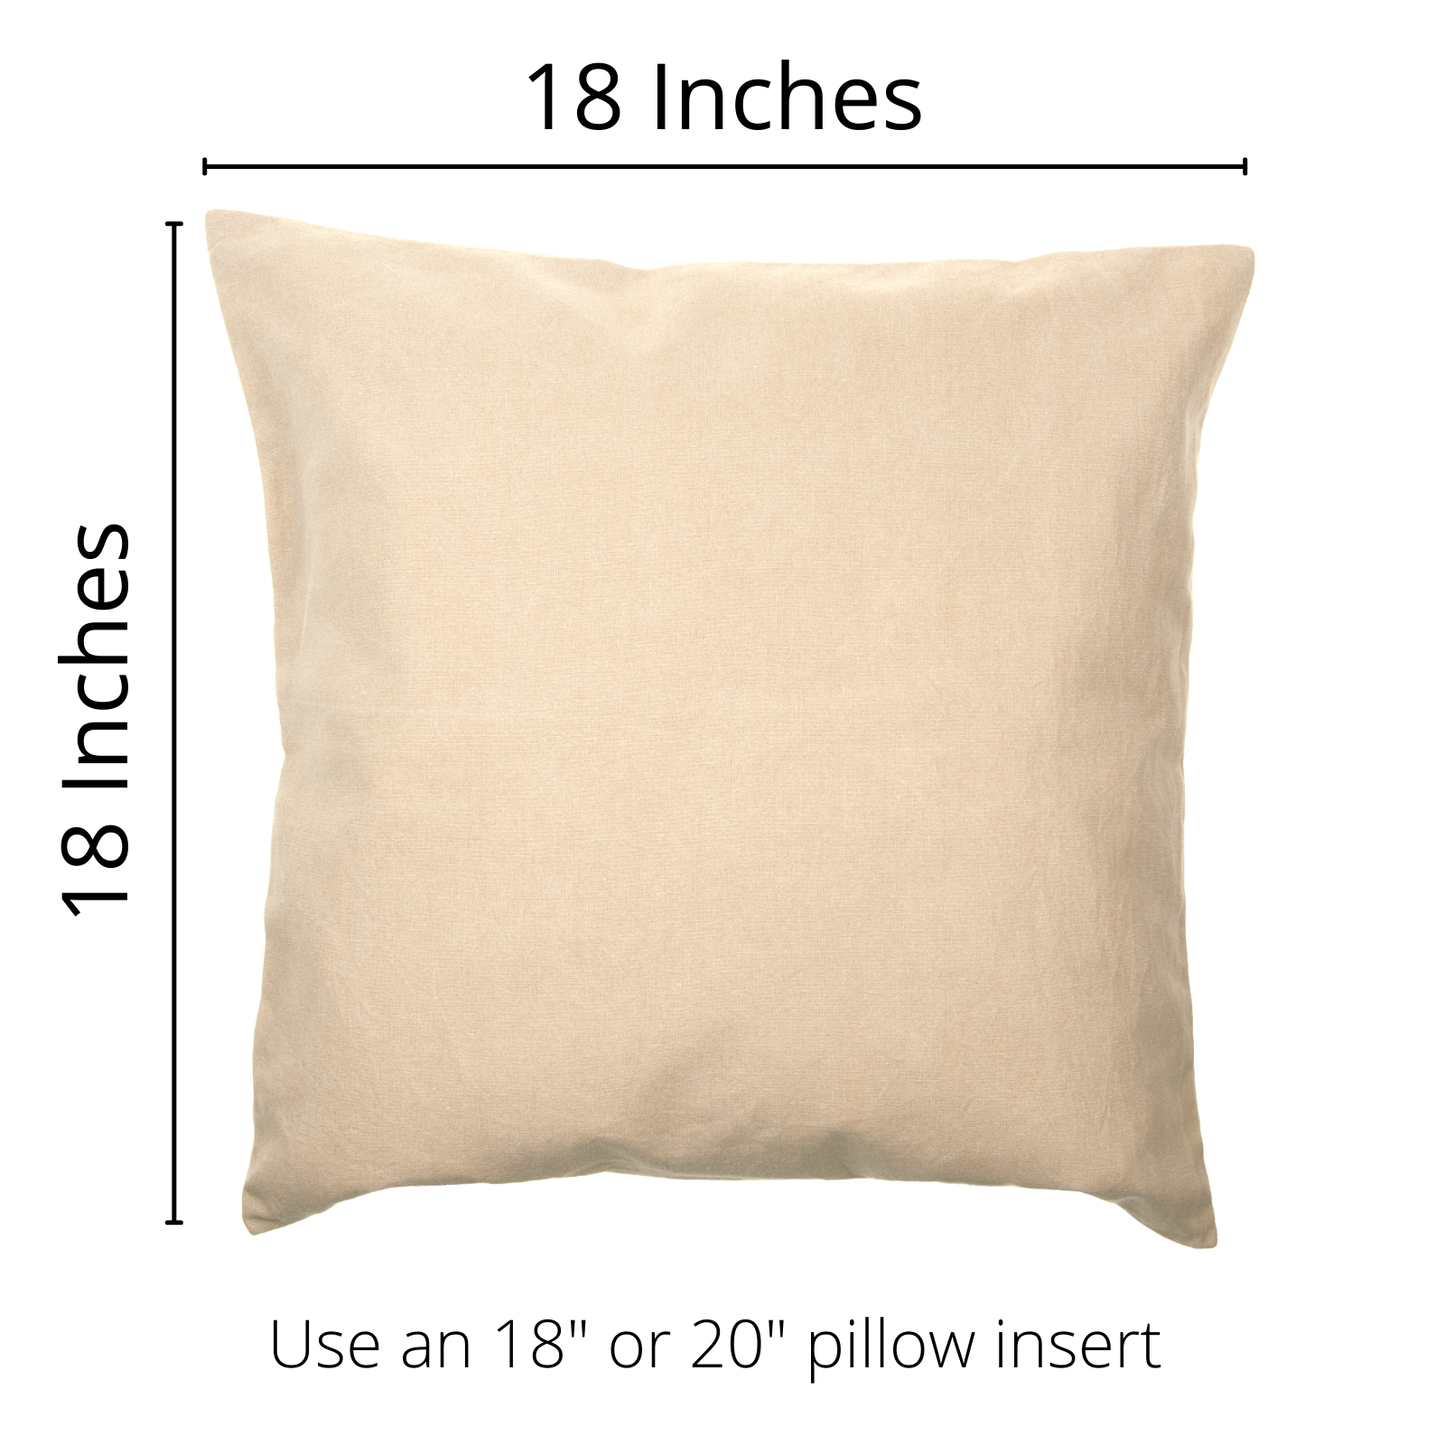 Personalized Grandma's Sweethearts Pillow Cover